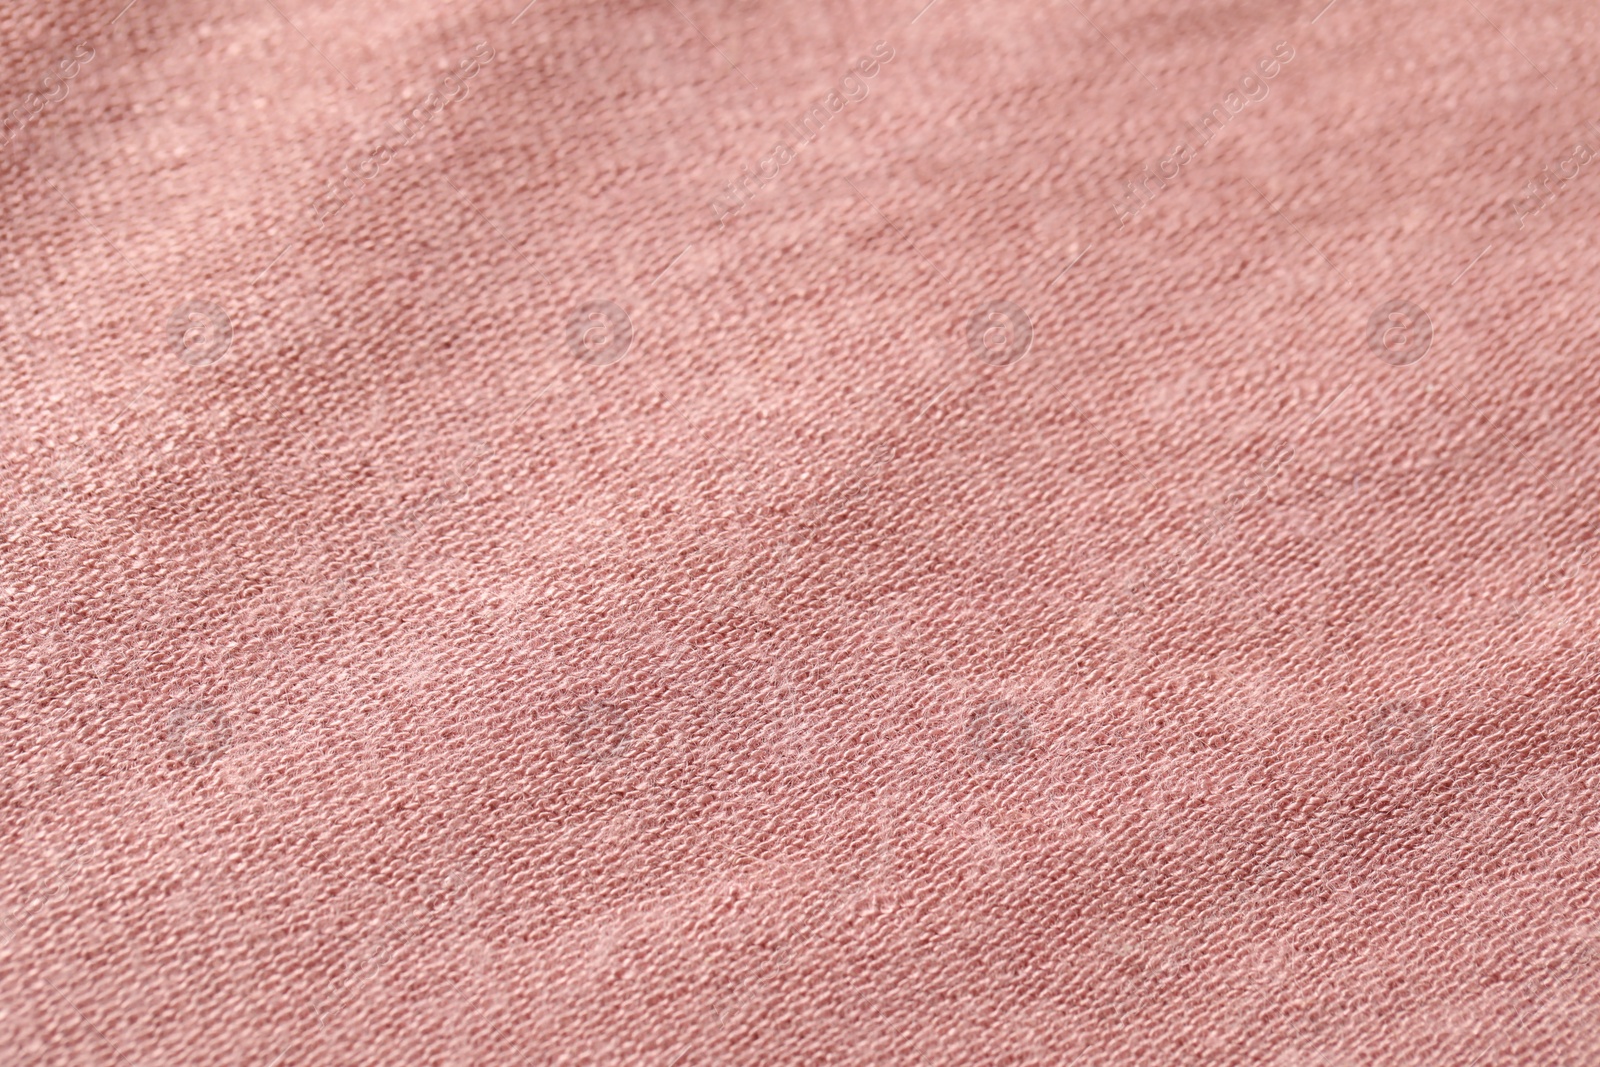 Photo of Texture of soft pink fabric as background, closeup